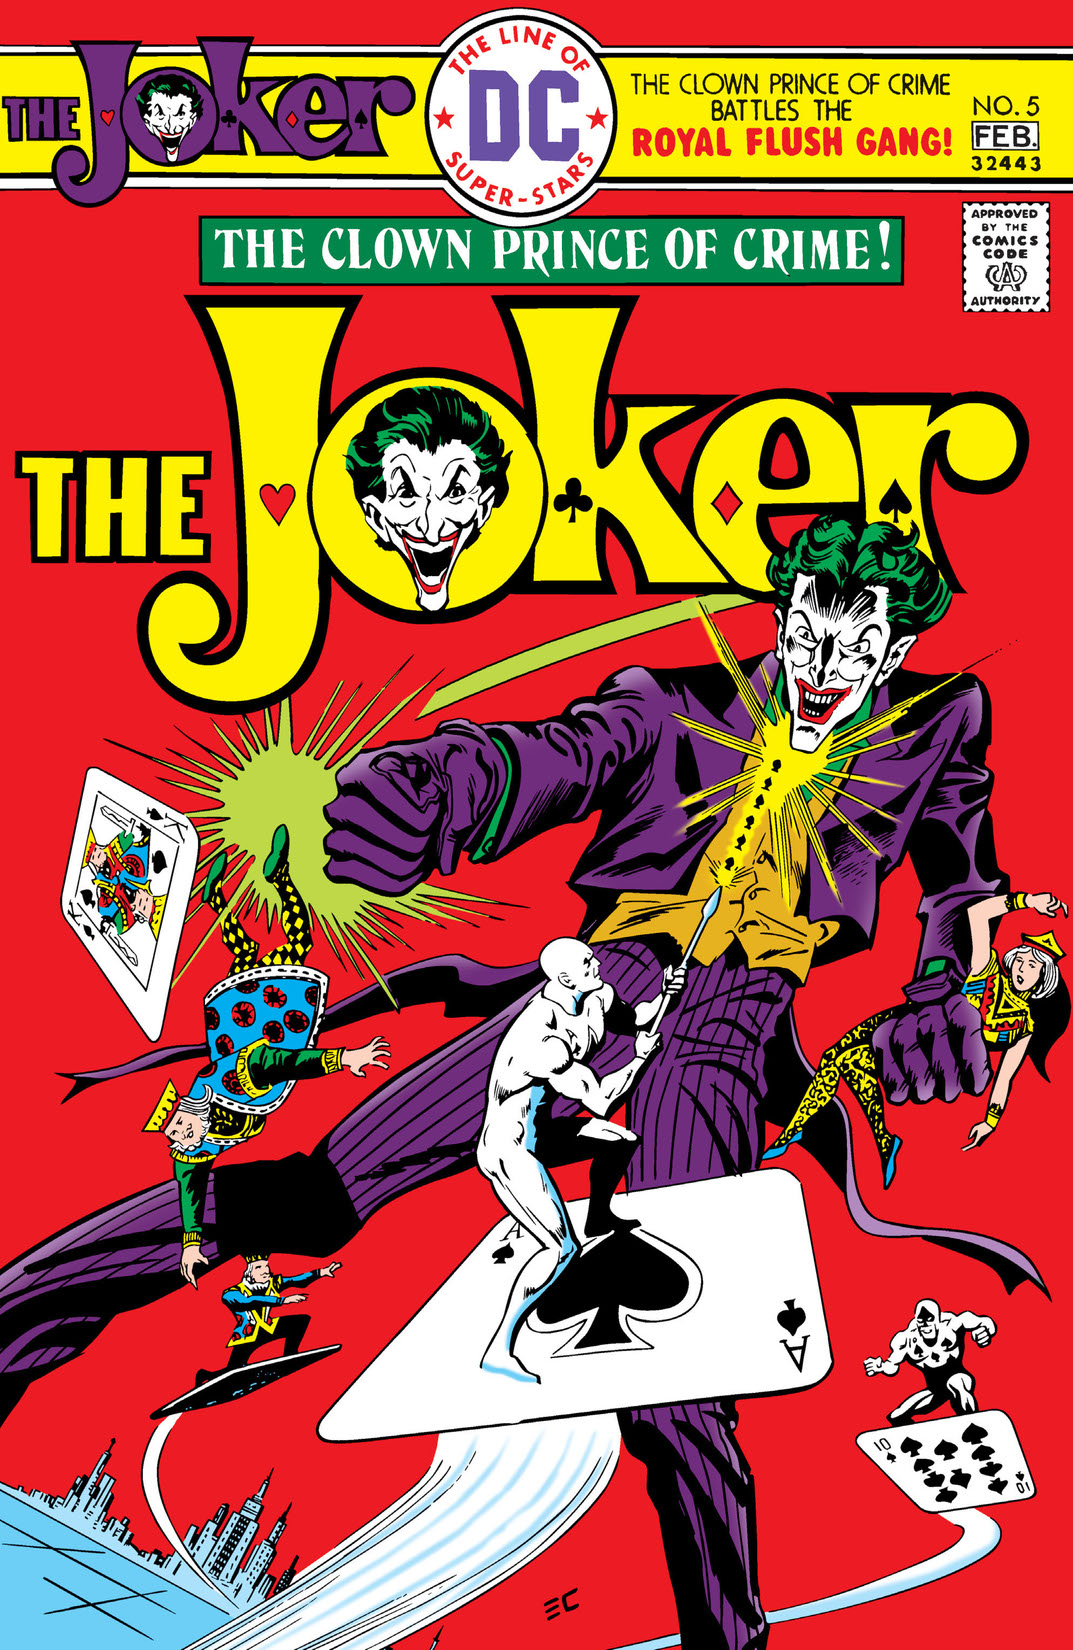 The Joker (1975-) #5 preview images